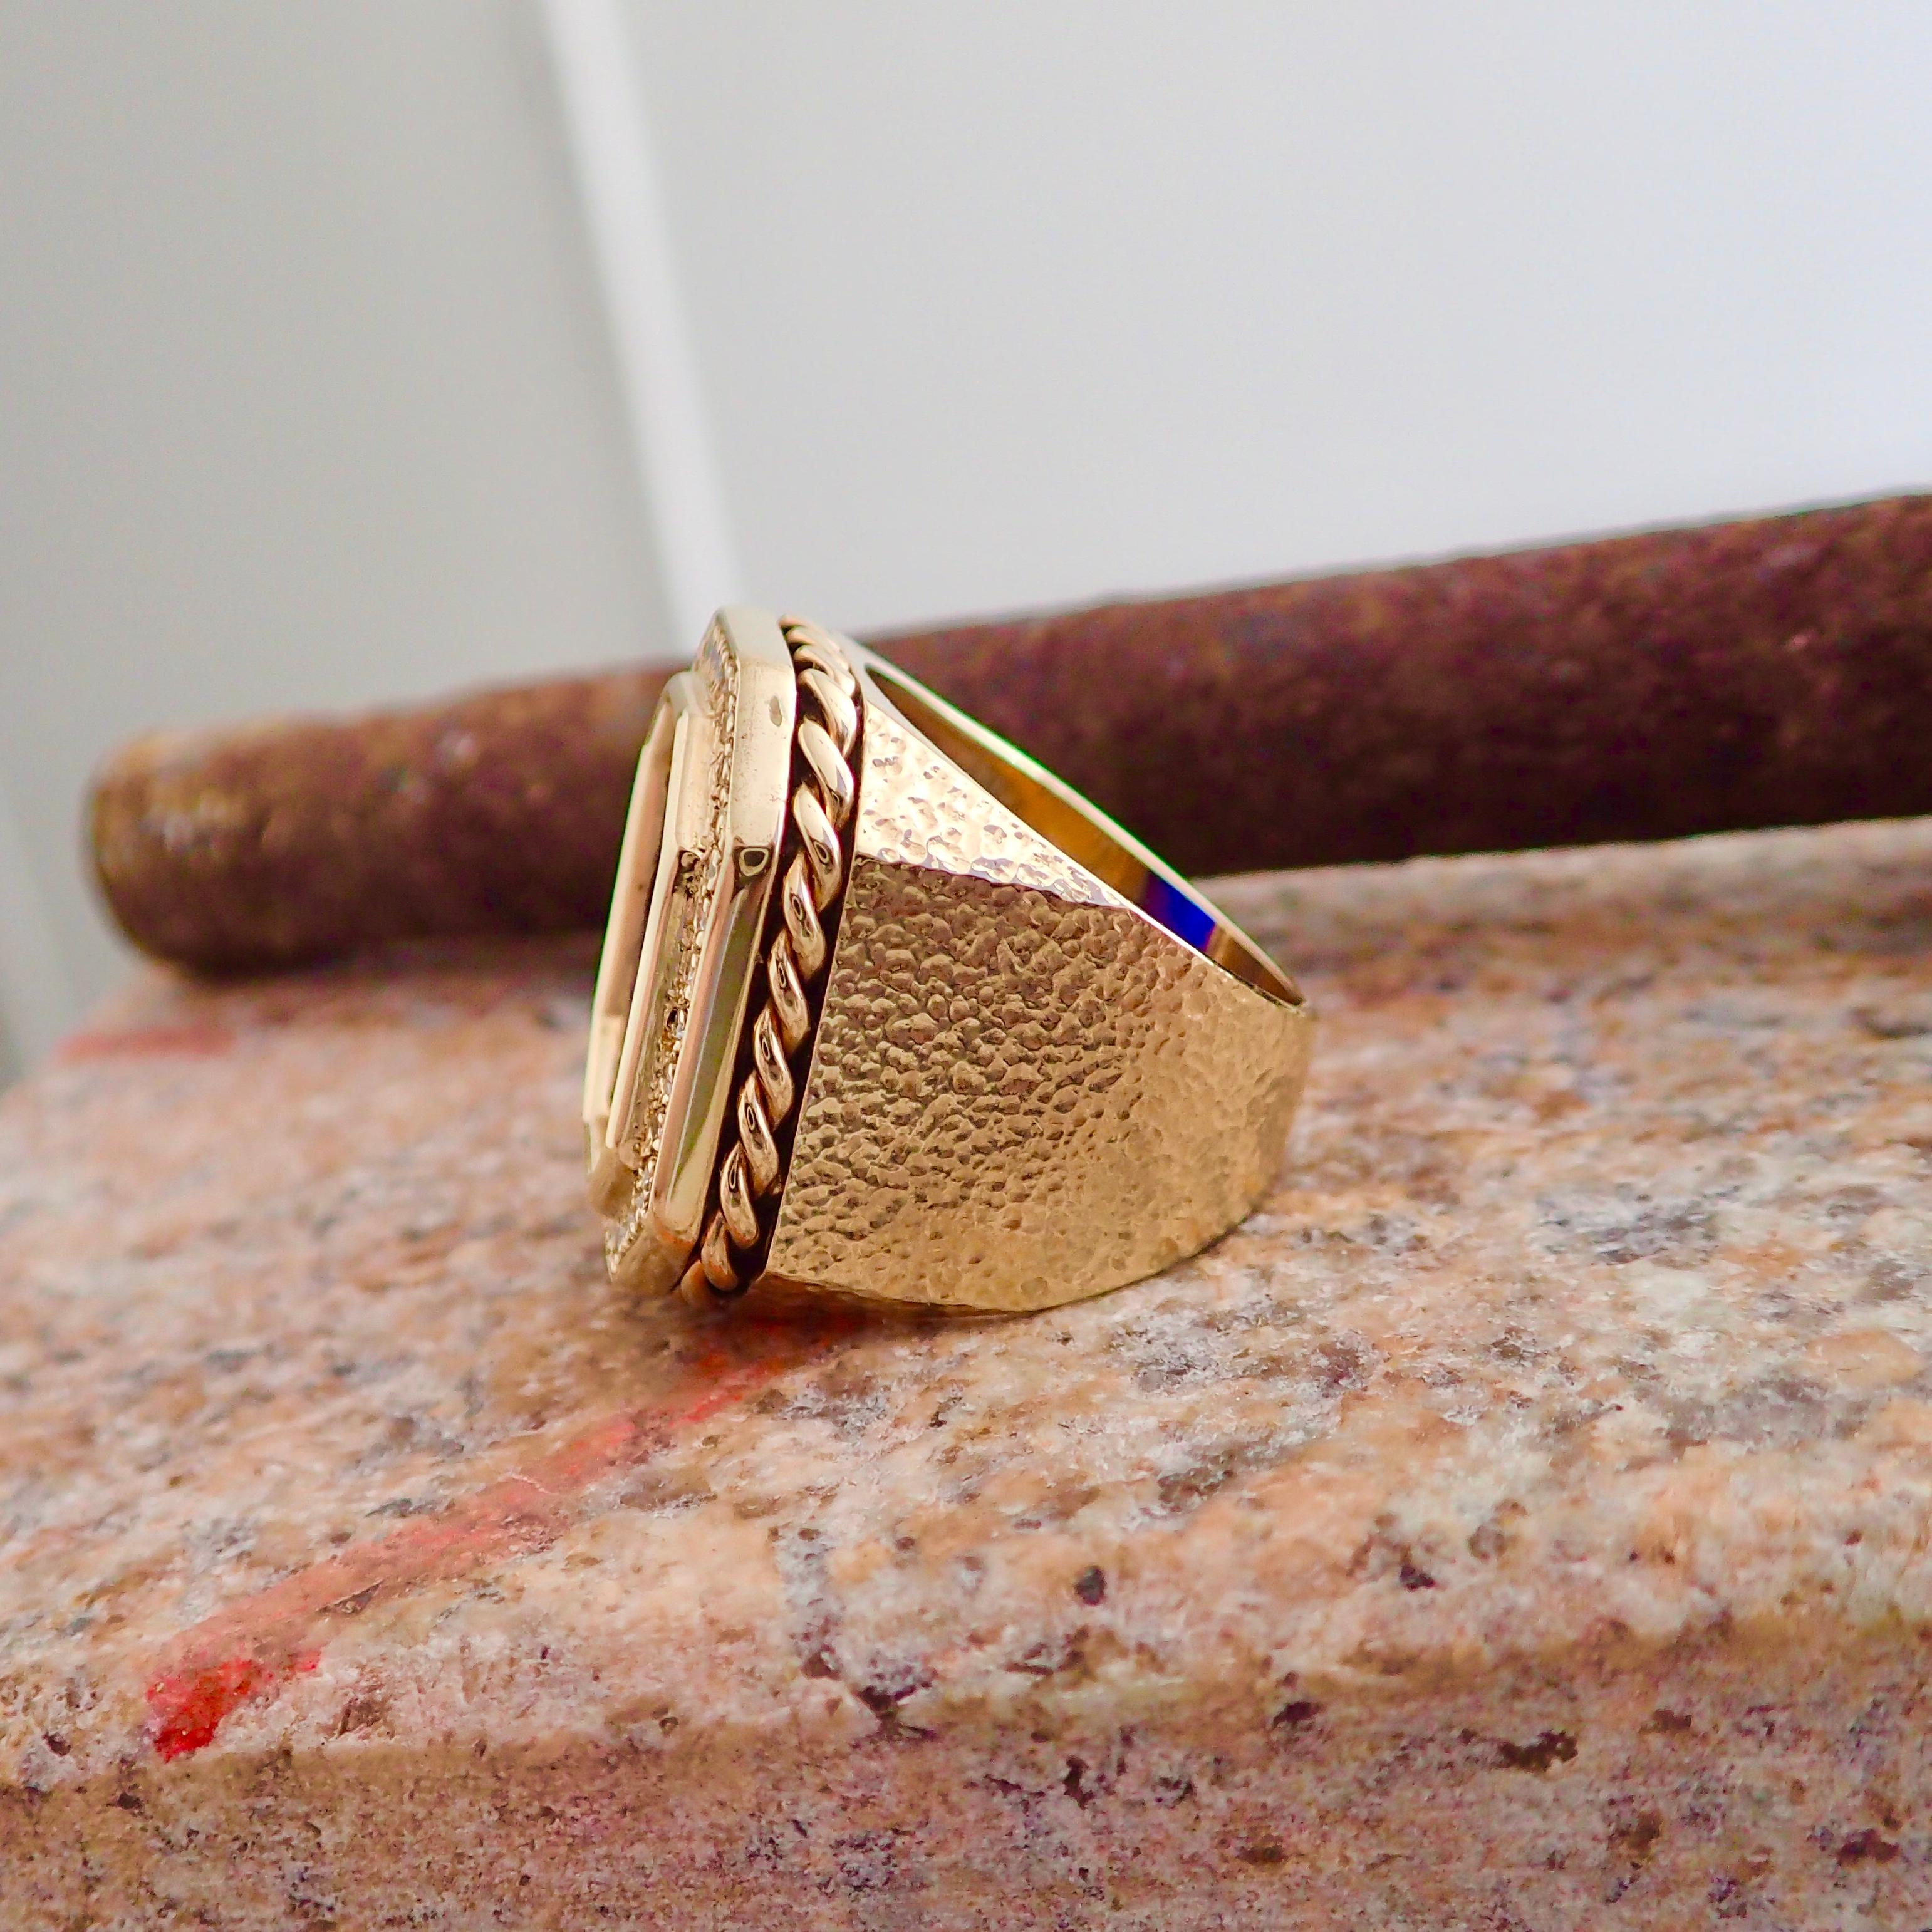 14k Yellow Gold Intaglio Ring with 0.43 of Diamond, Hammered Texture & Braiding For Sale 2